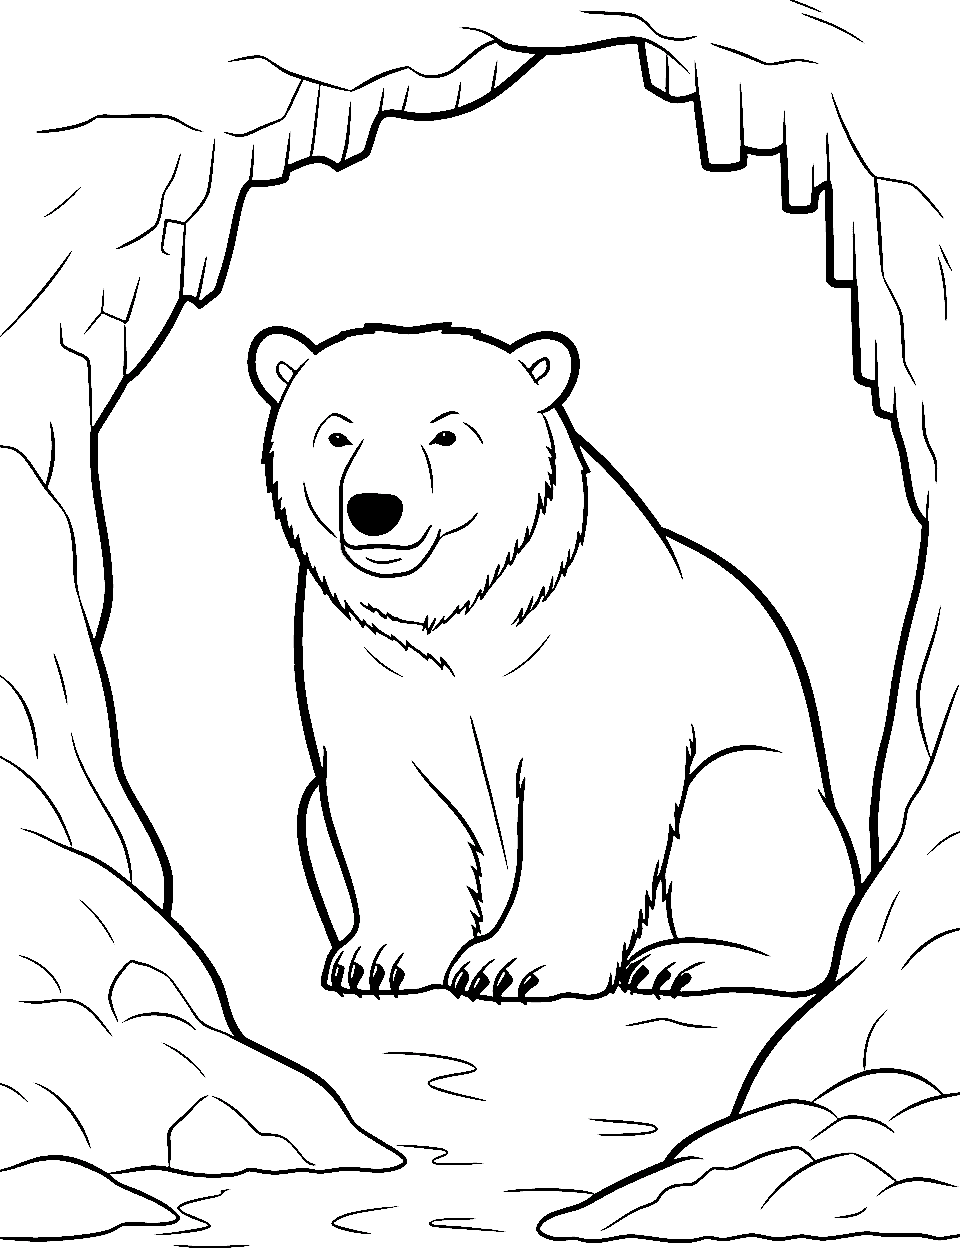 Ice Bear's Chilling Zone Coloring Page - Ice Bear relaxing in a cold cave.